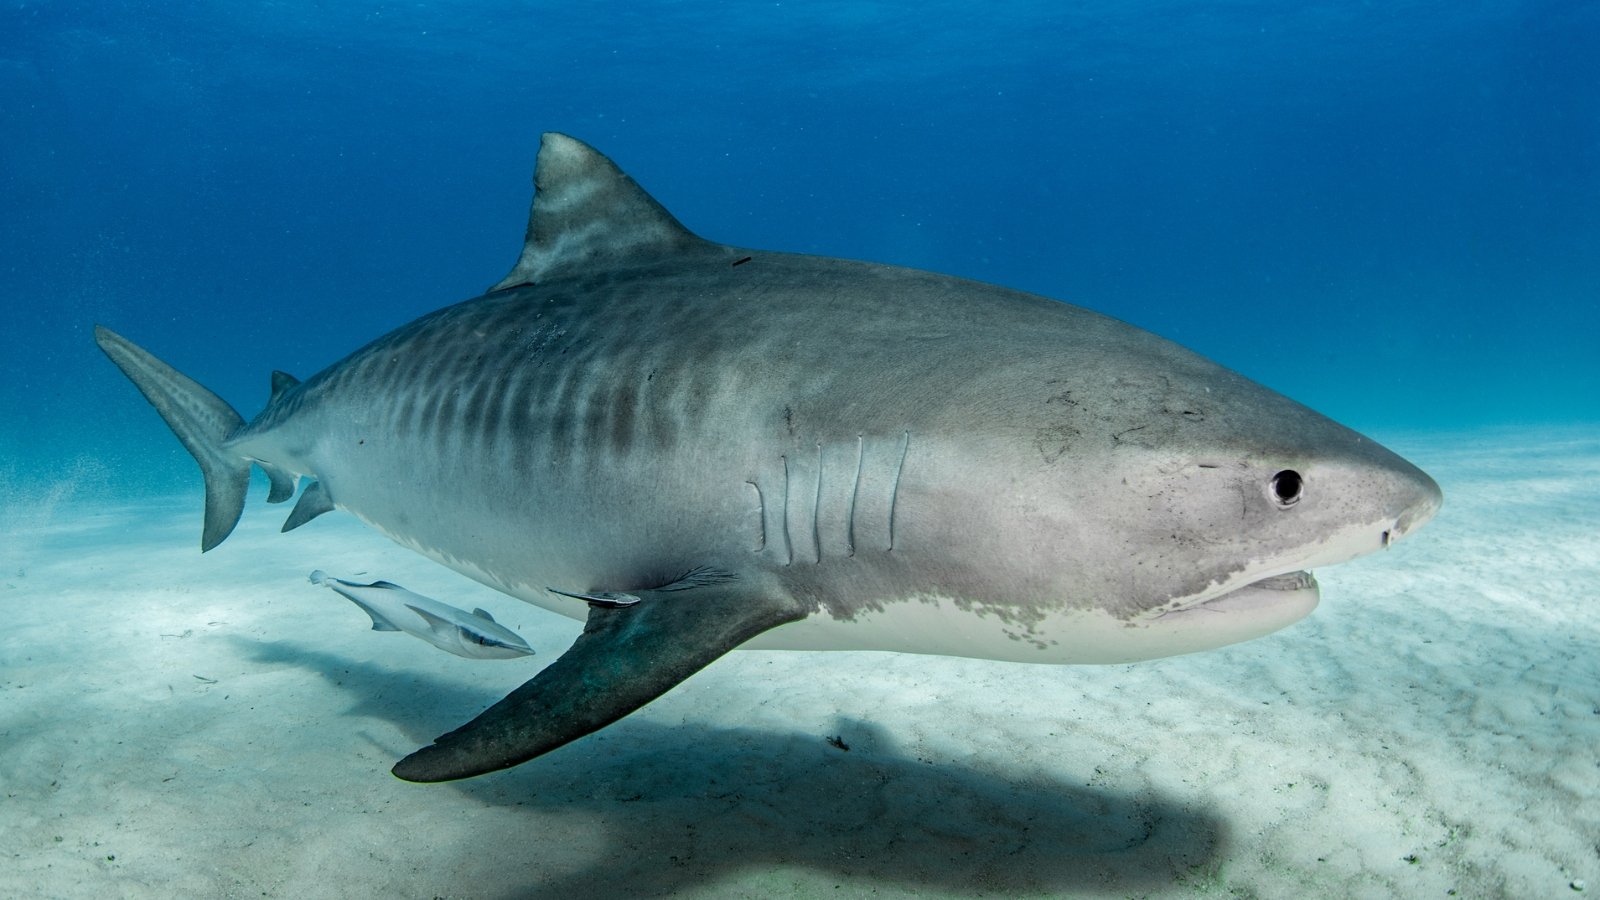 Tiger shark attack survivor solves mystery, plus more outdoor tales - cover